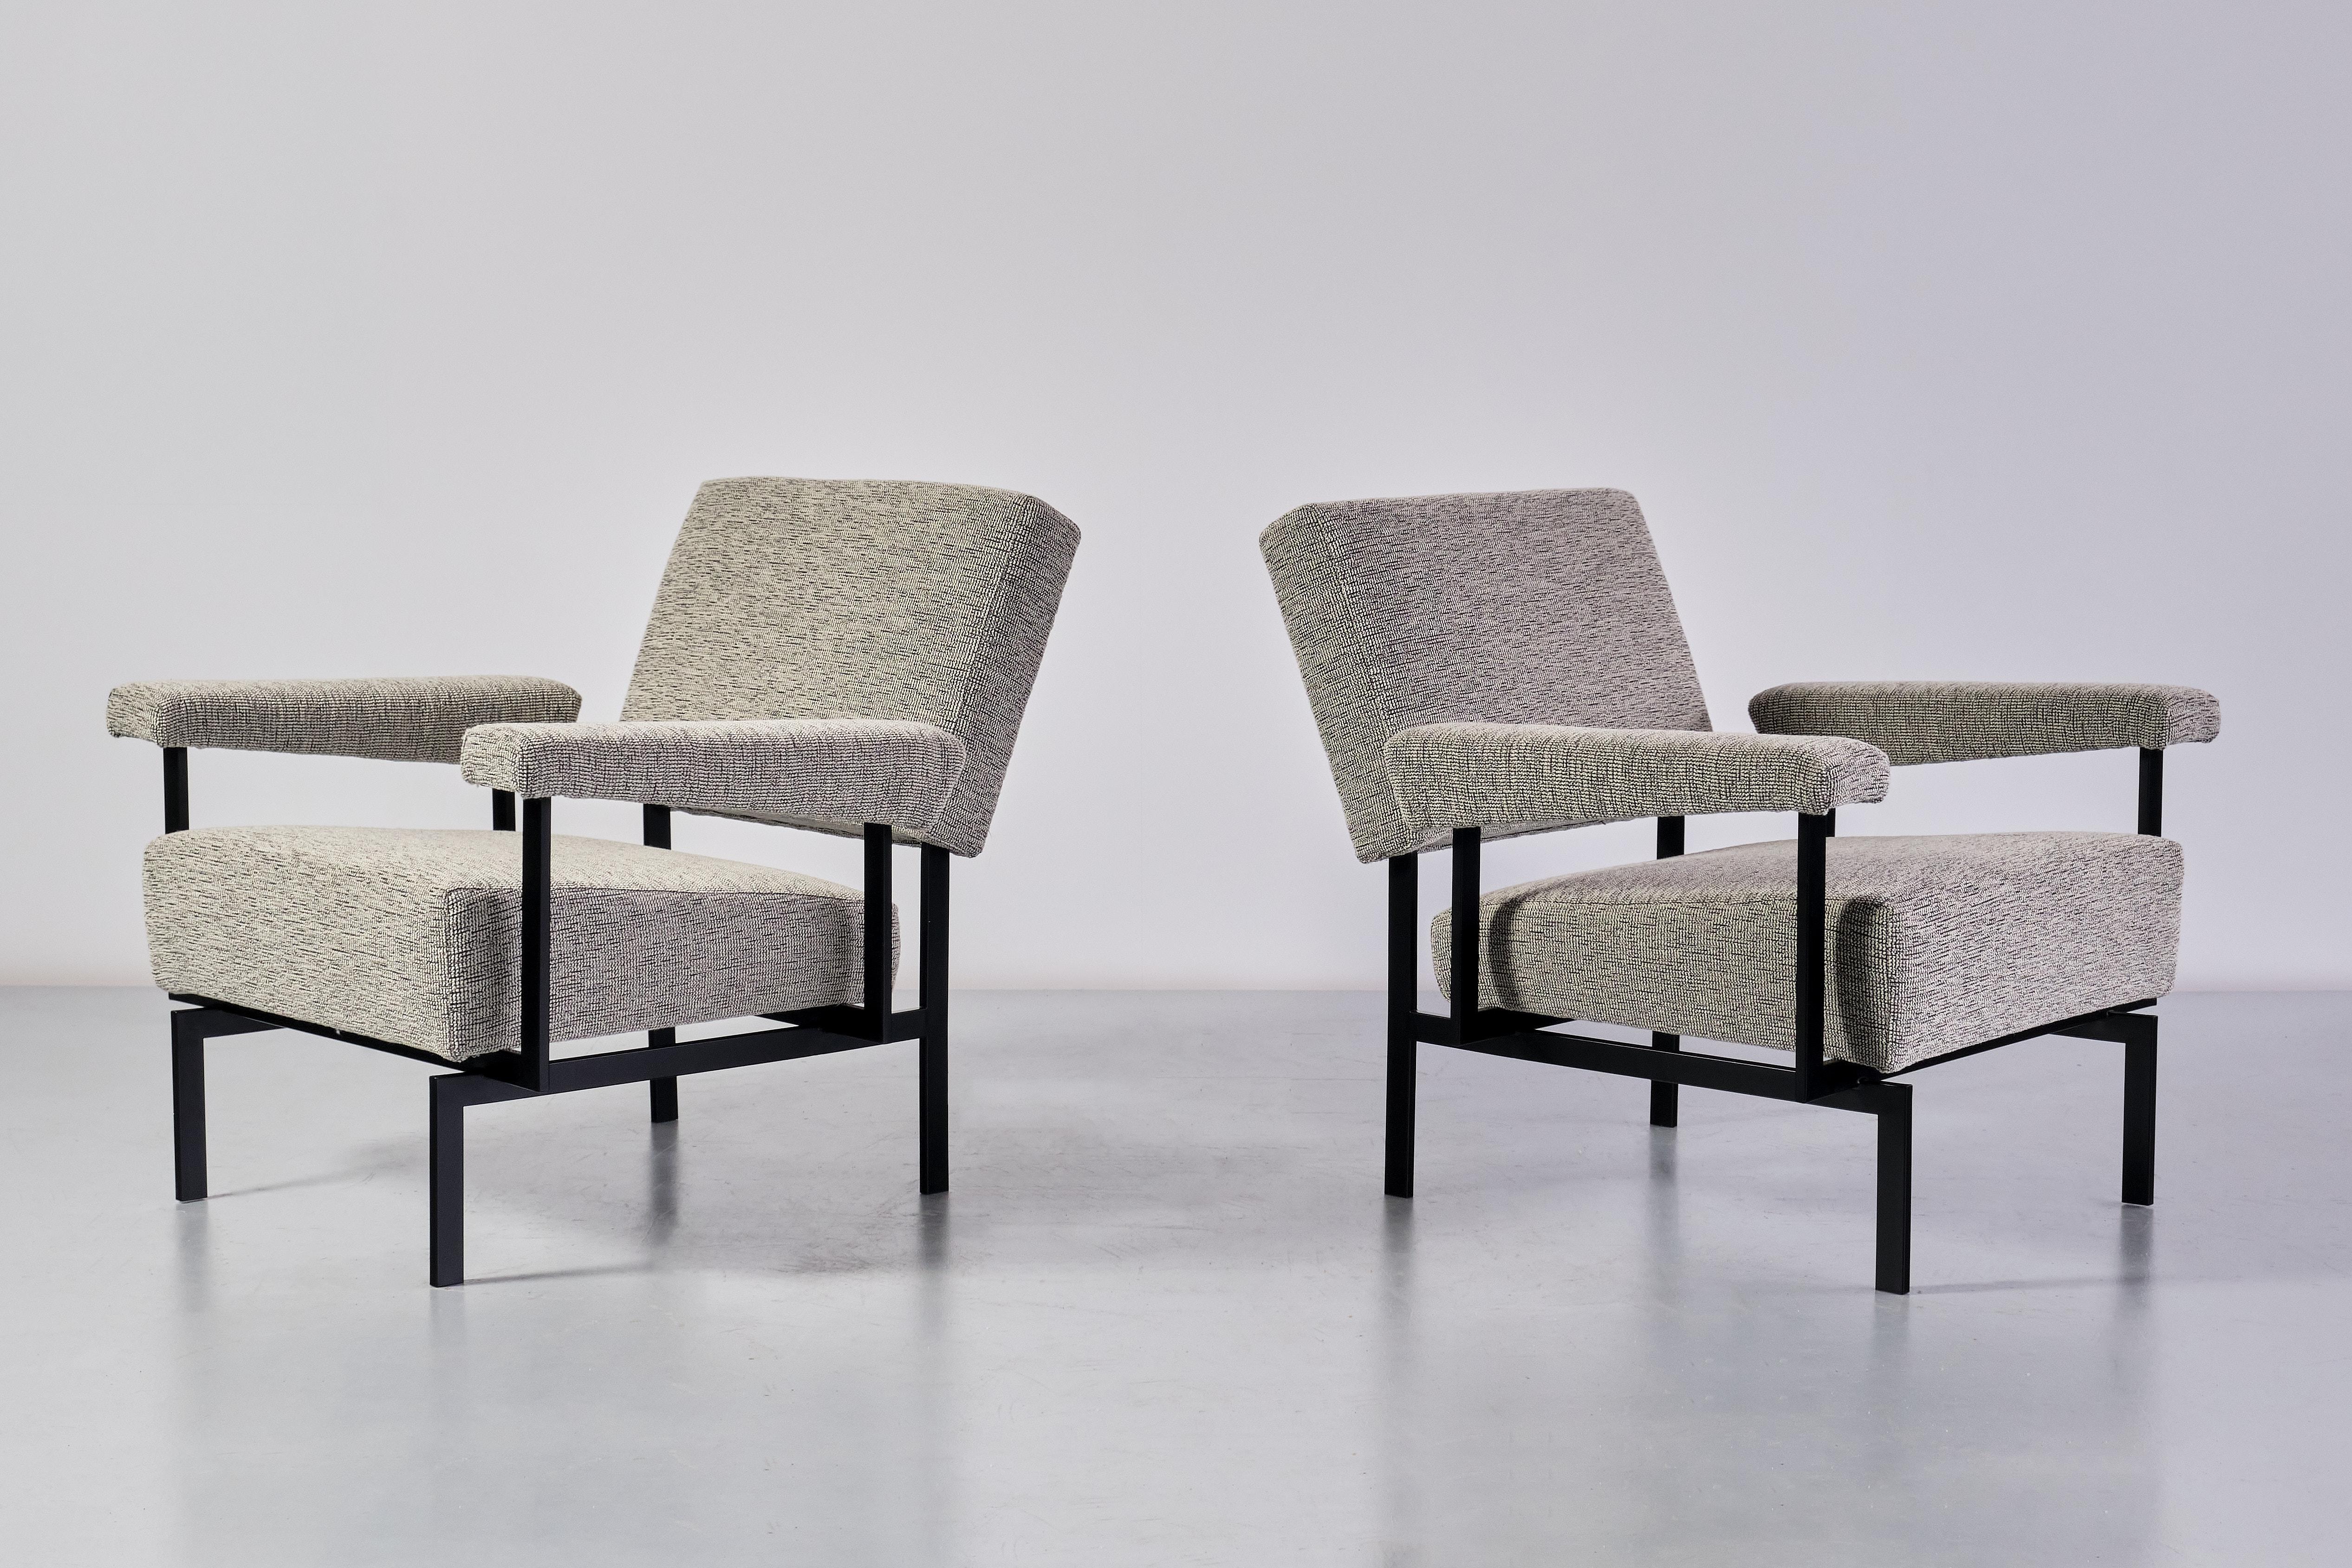 Cees Braakman FM07 Armchairs, Japan Series for Pastoe, Netherlands, 1958 For Sale 8